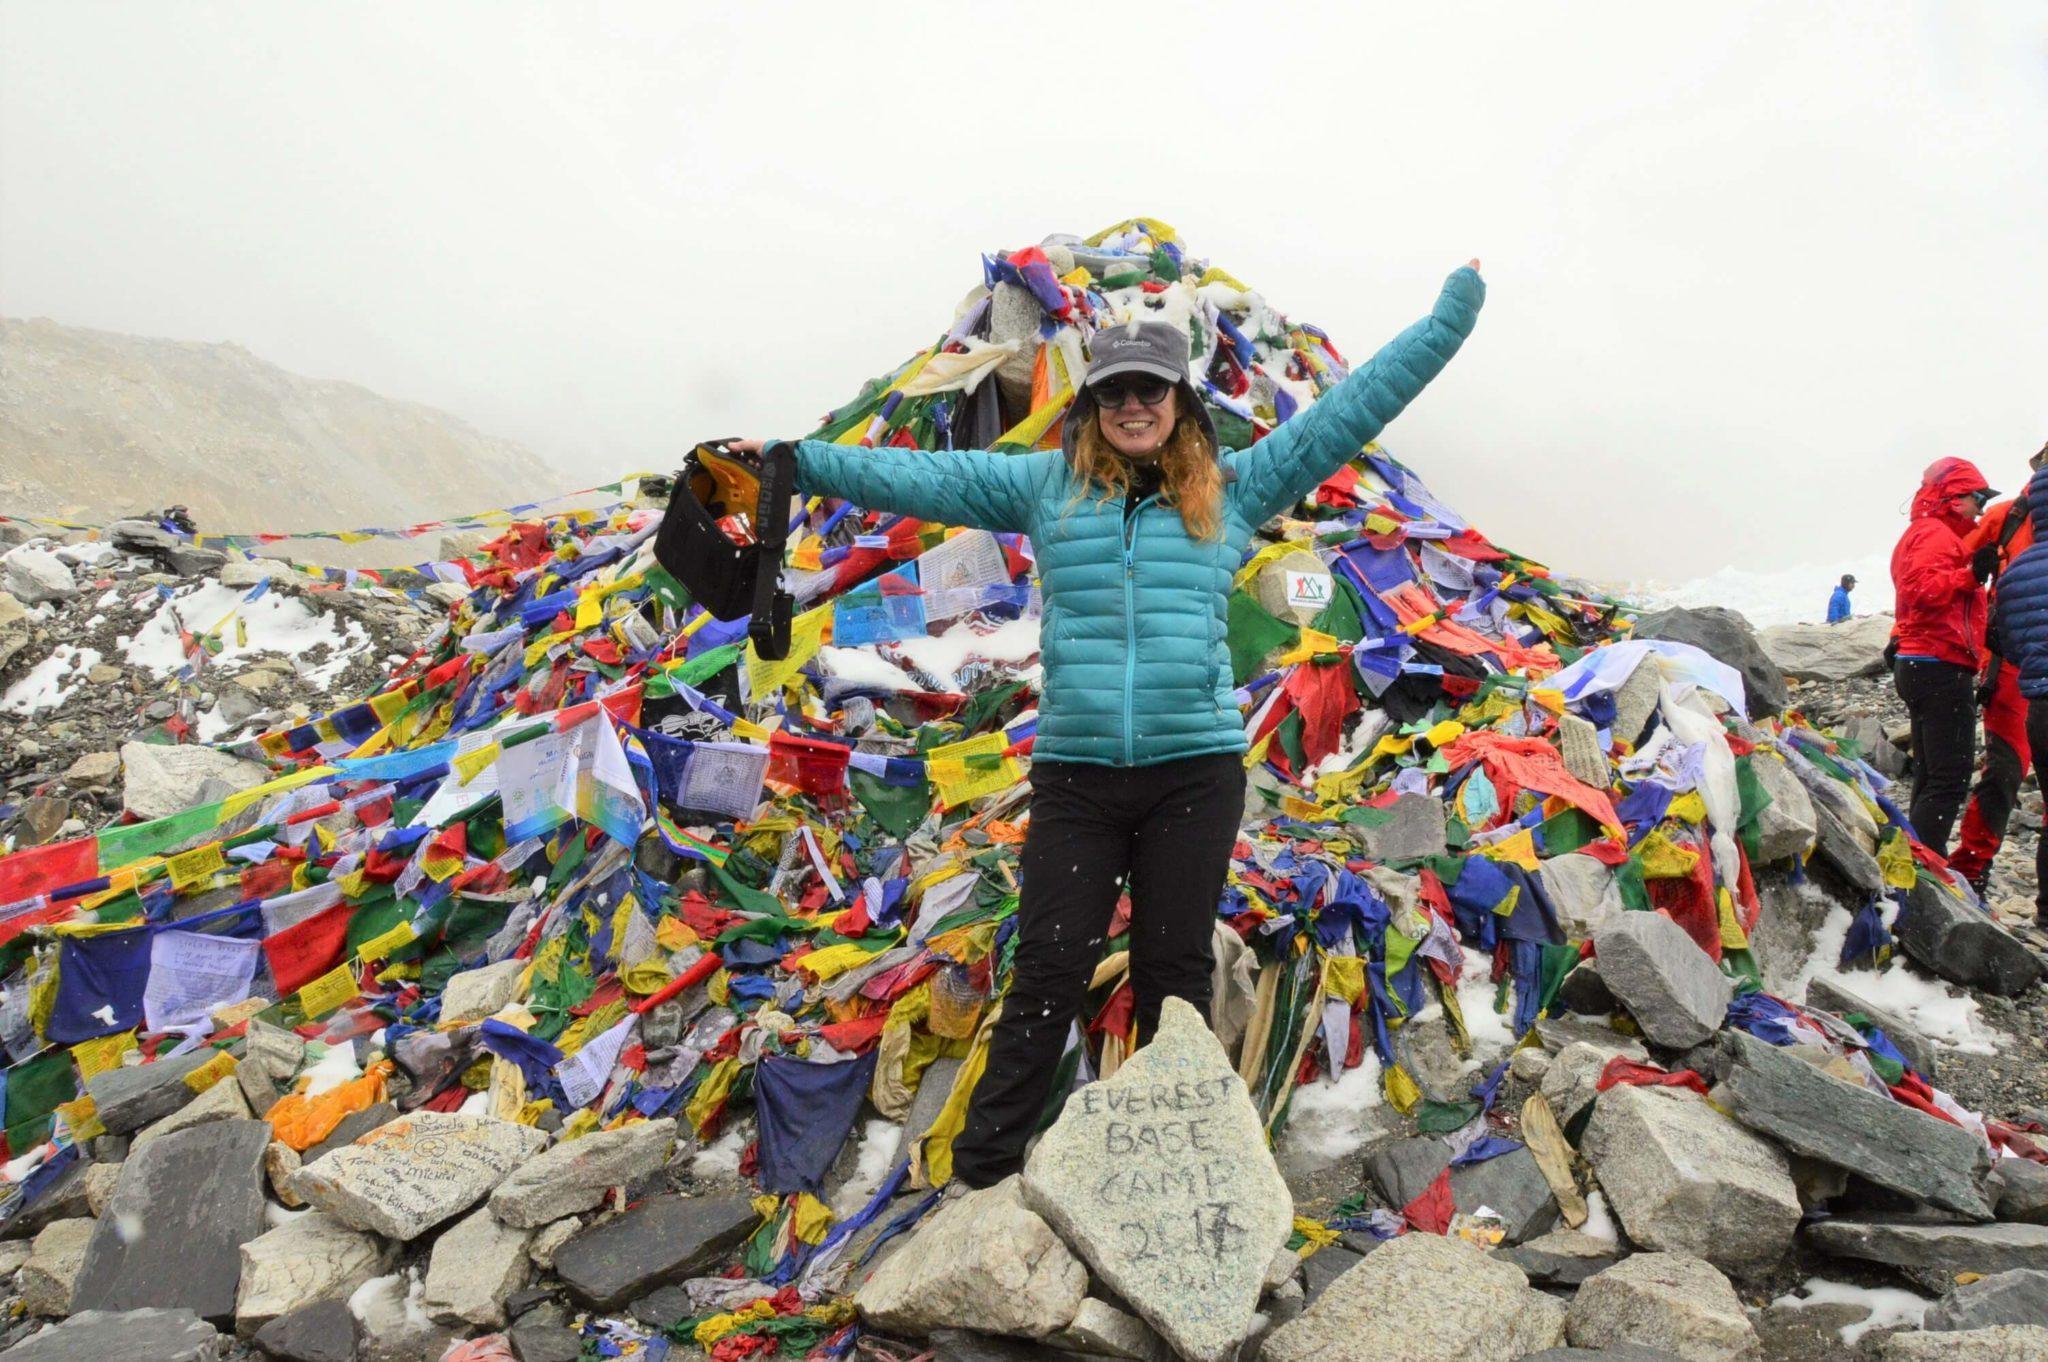 What it's really like to trek to Everest Base Camp